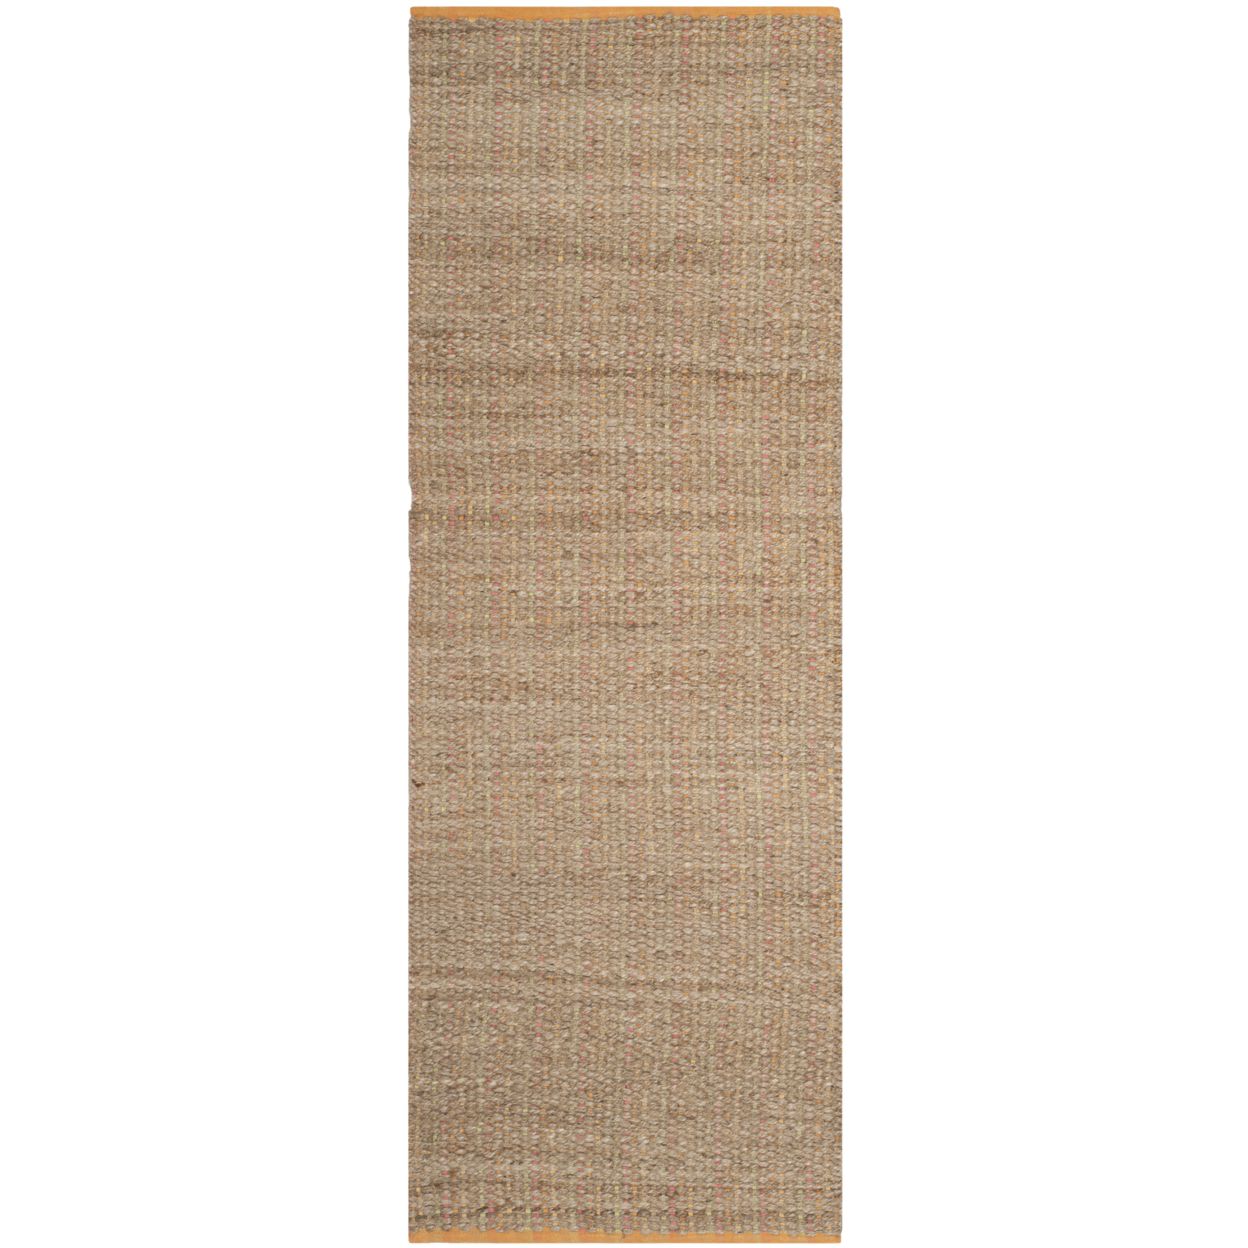 SAFAVIEH Cape Cod Collection CAP811D Handwoven Spring Rug - 8' X 10'